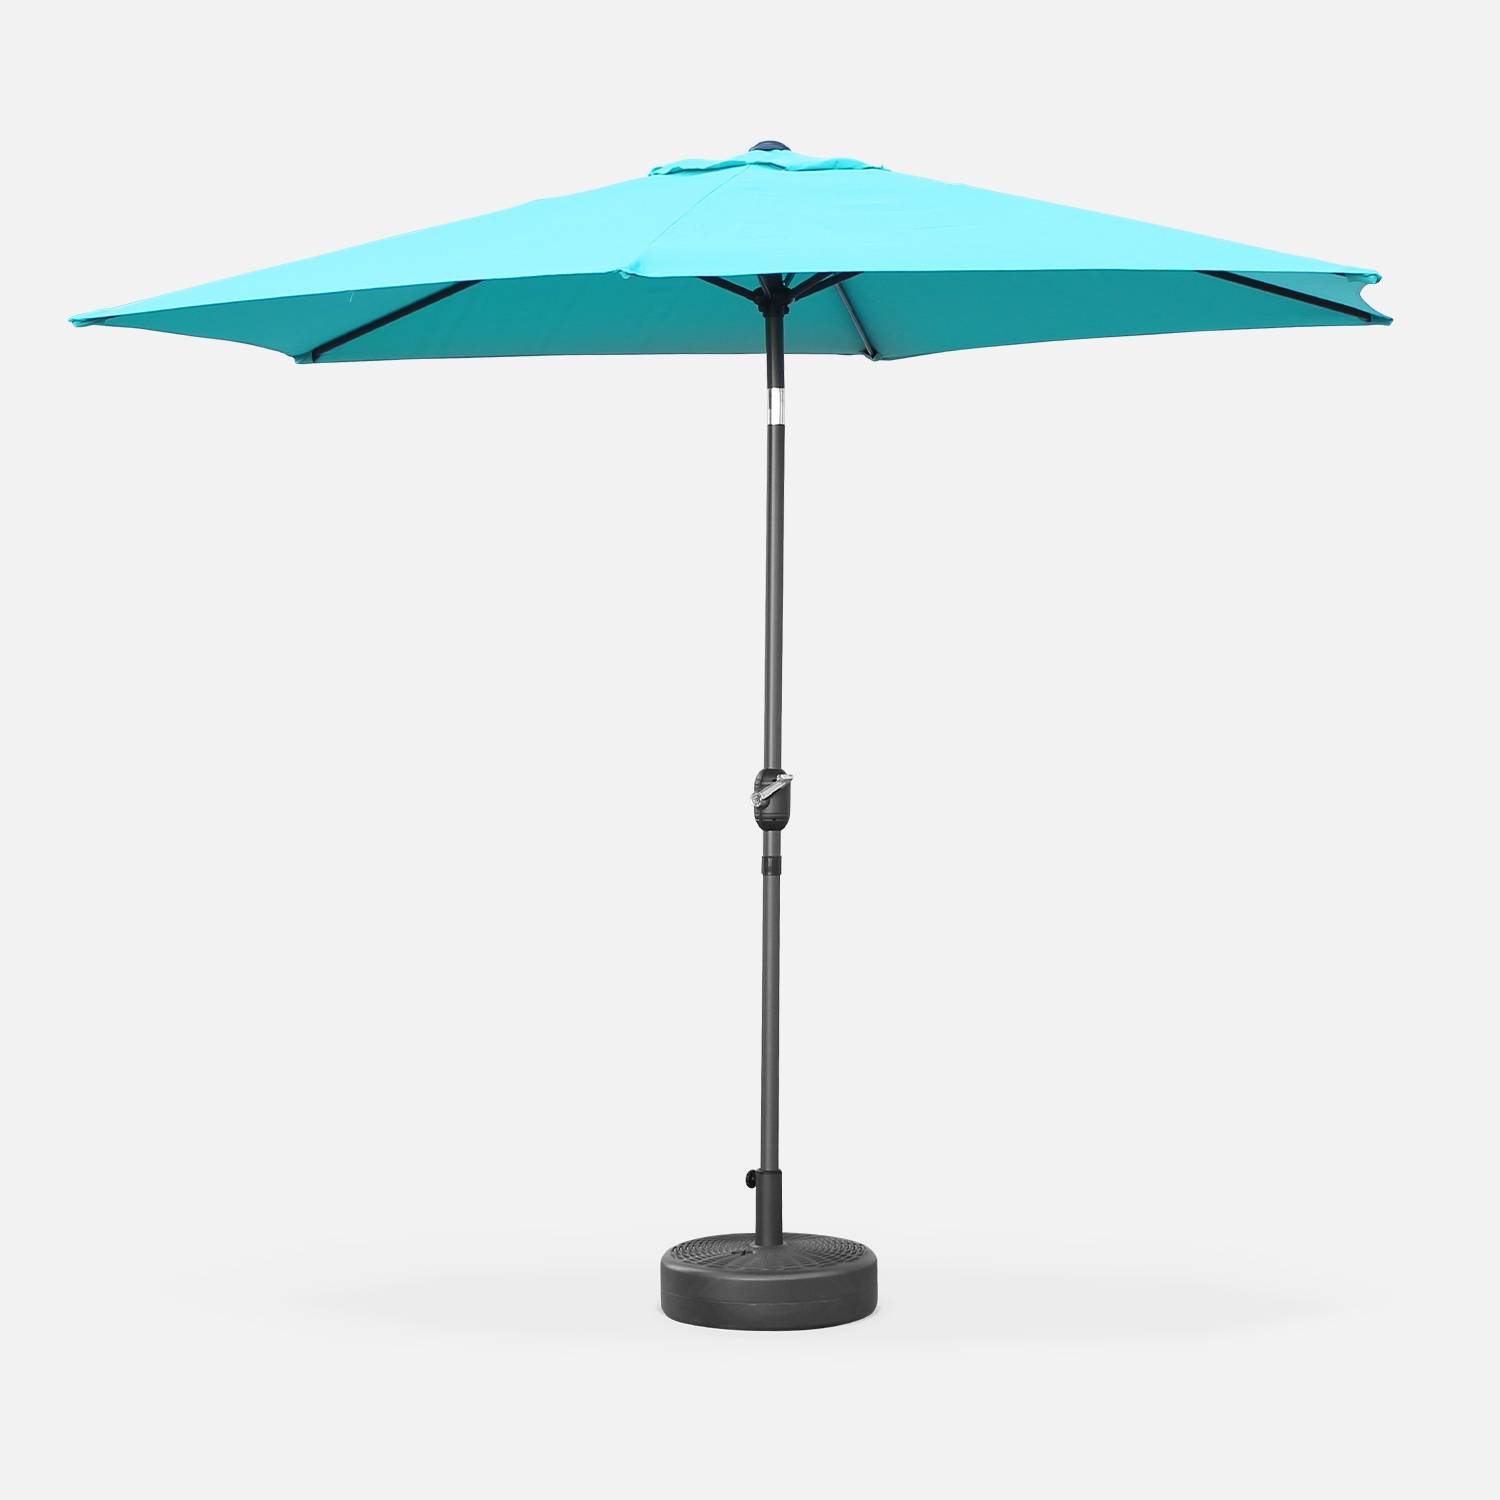 Stokparasol TOUQUET - Ø295cm - Rond - Turquoise | sweeek